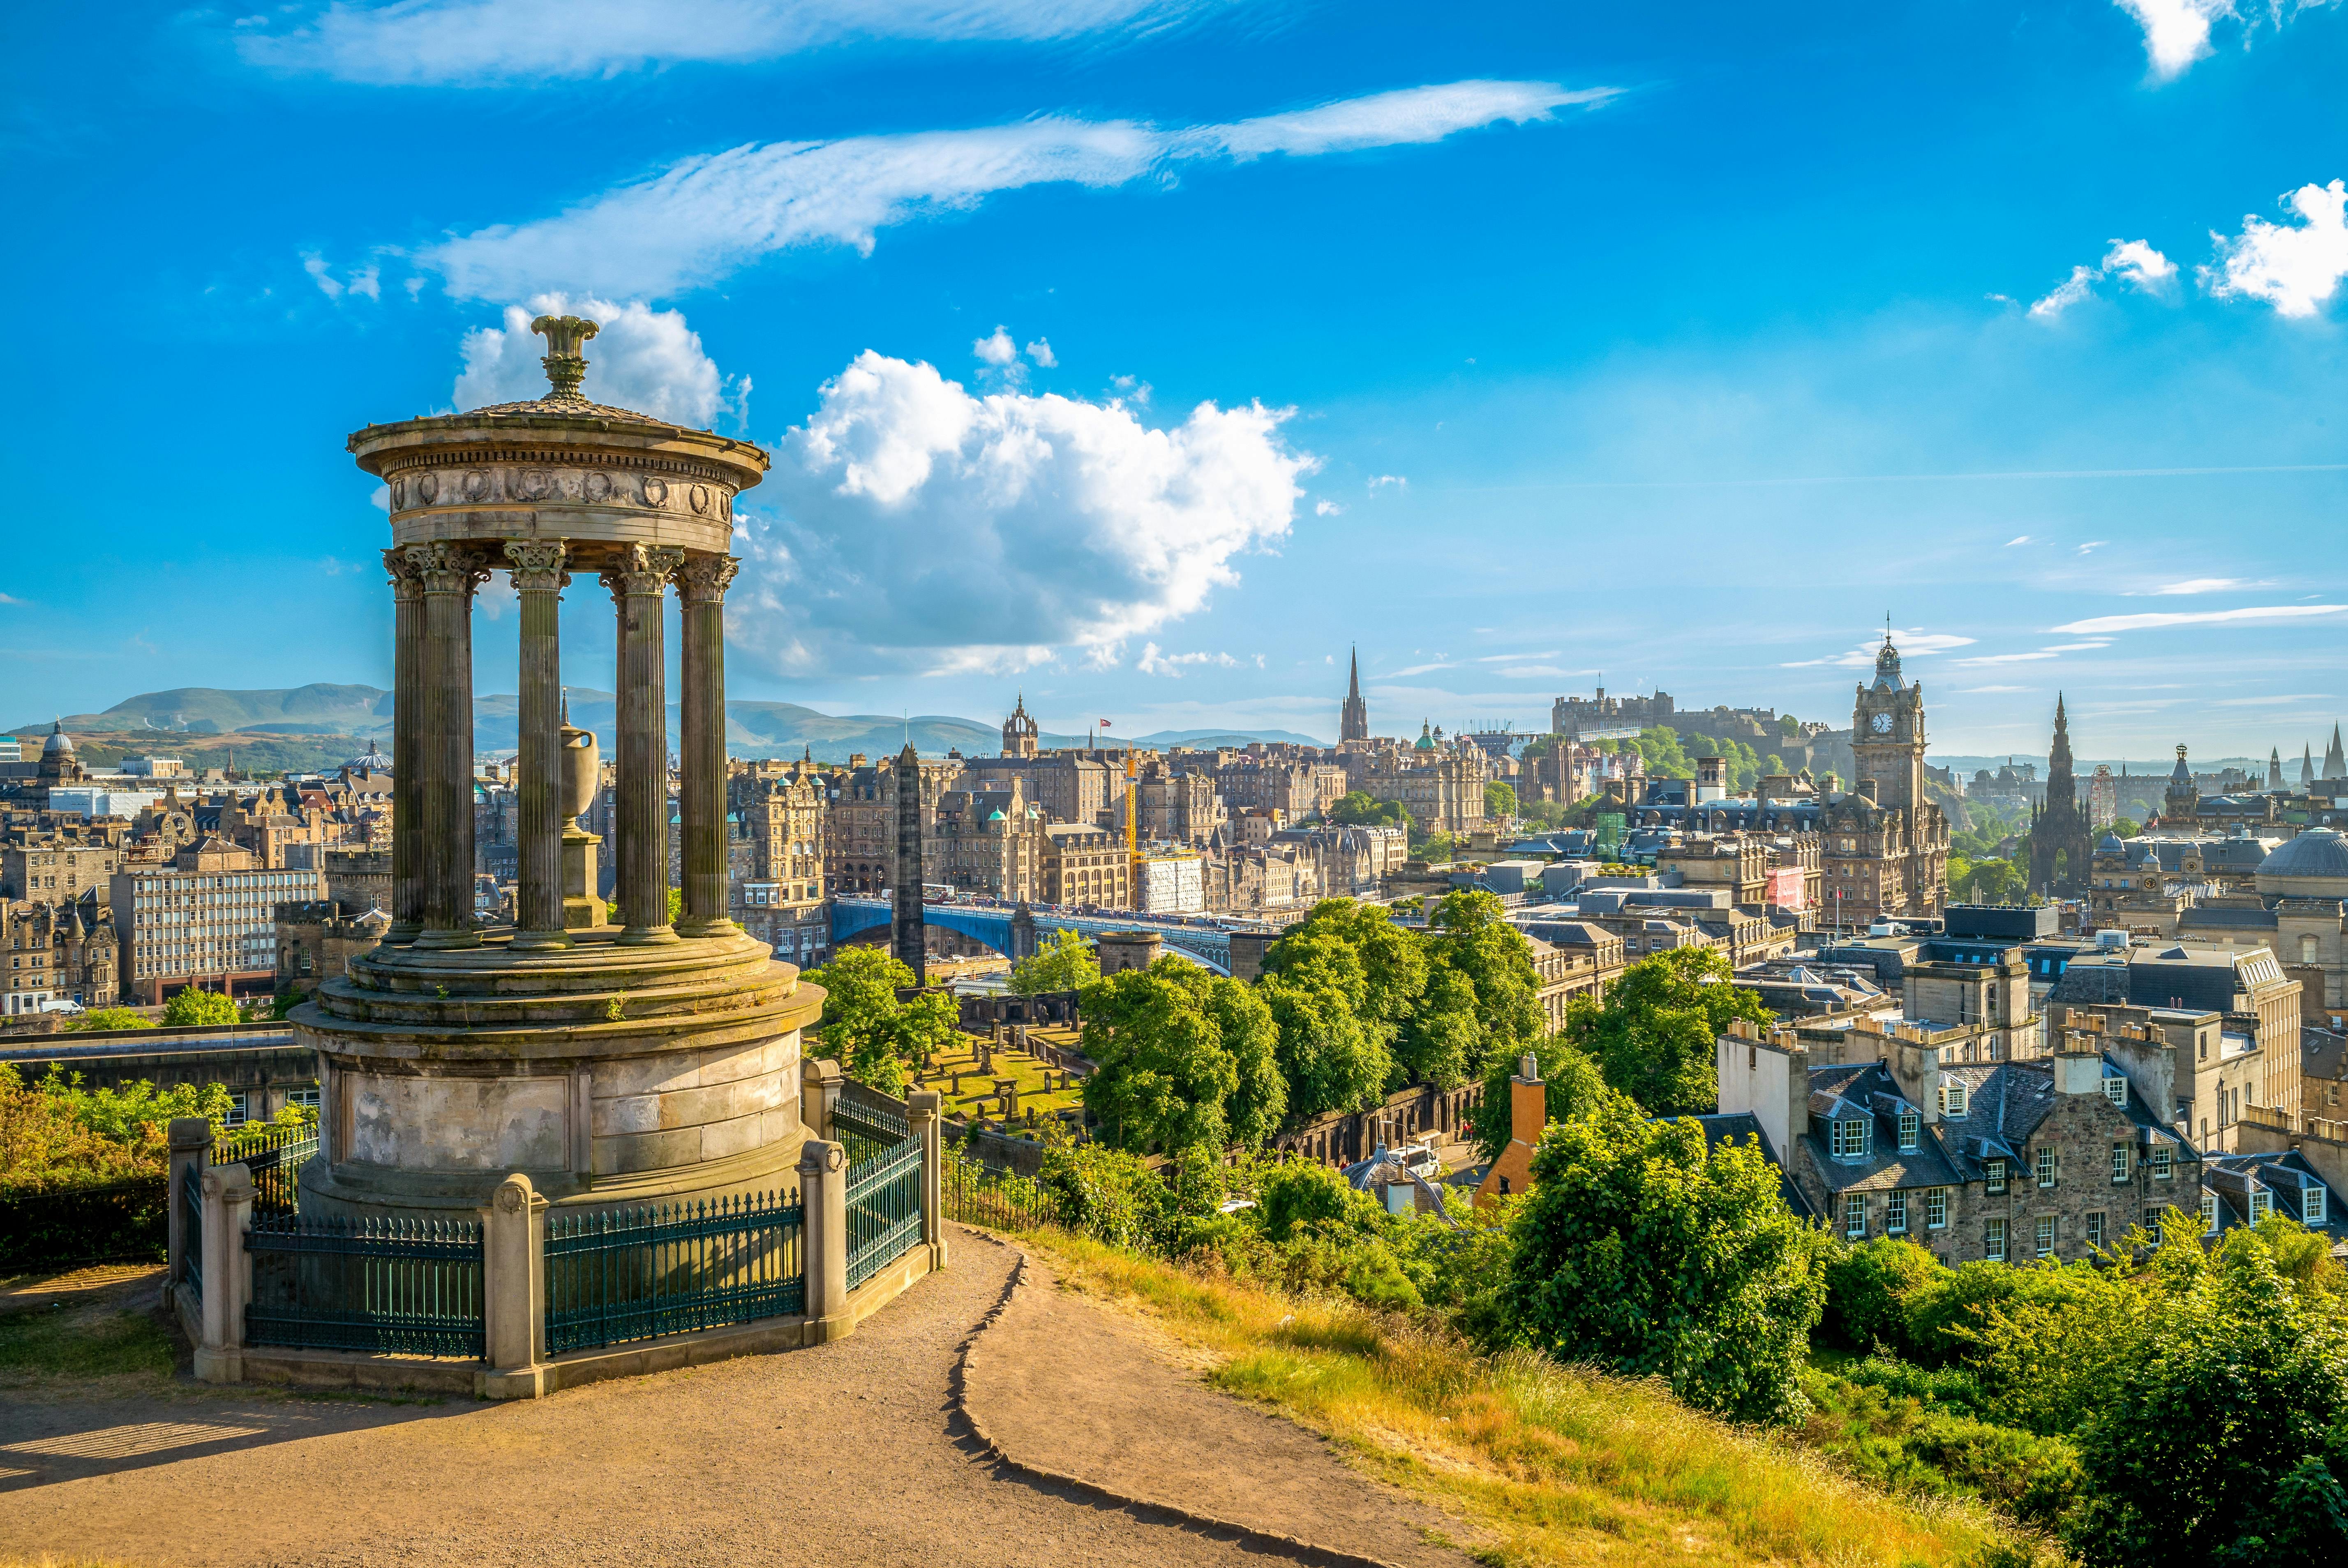 Self-guided audio tour of Edinburgh's old town highlights